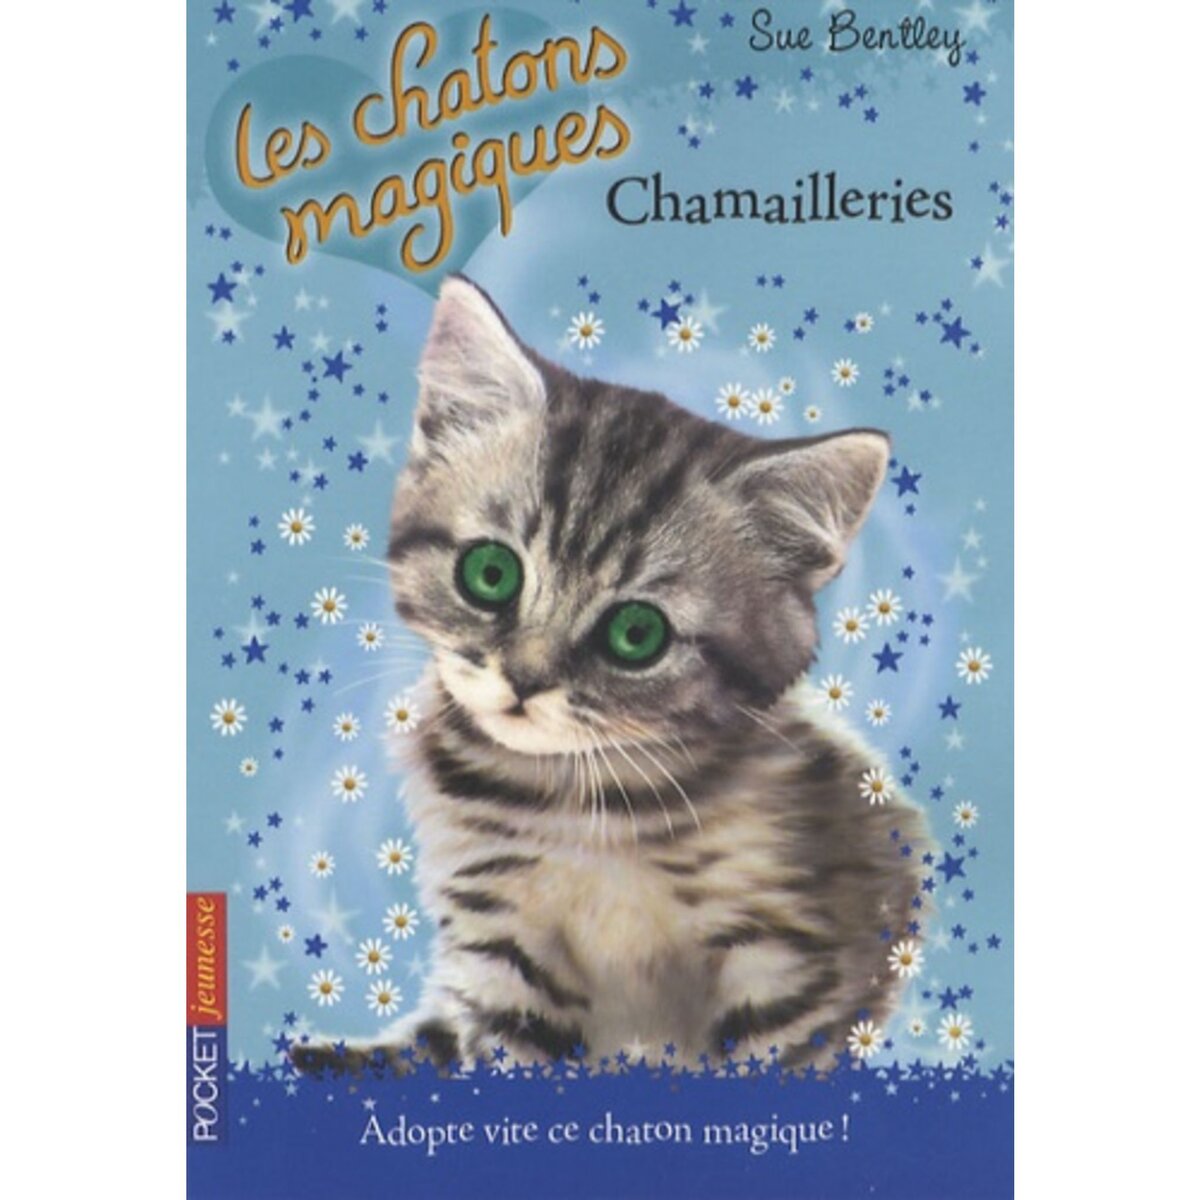  LES CHATONS MAGIQUES TOME 4 : CHAMAILLERIES, Bentley Sue